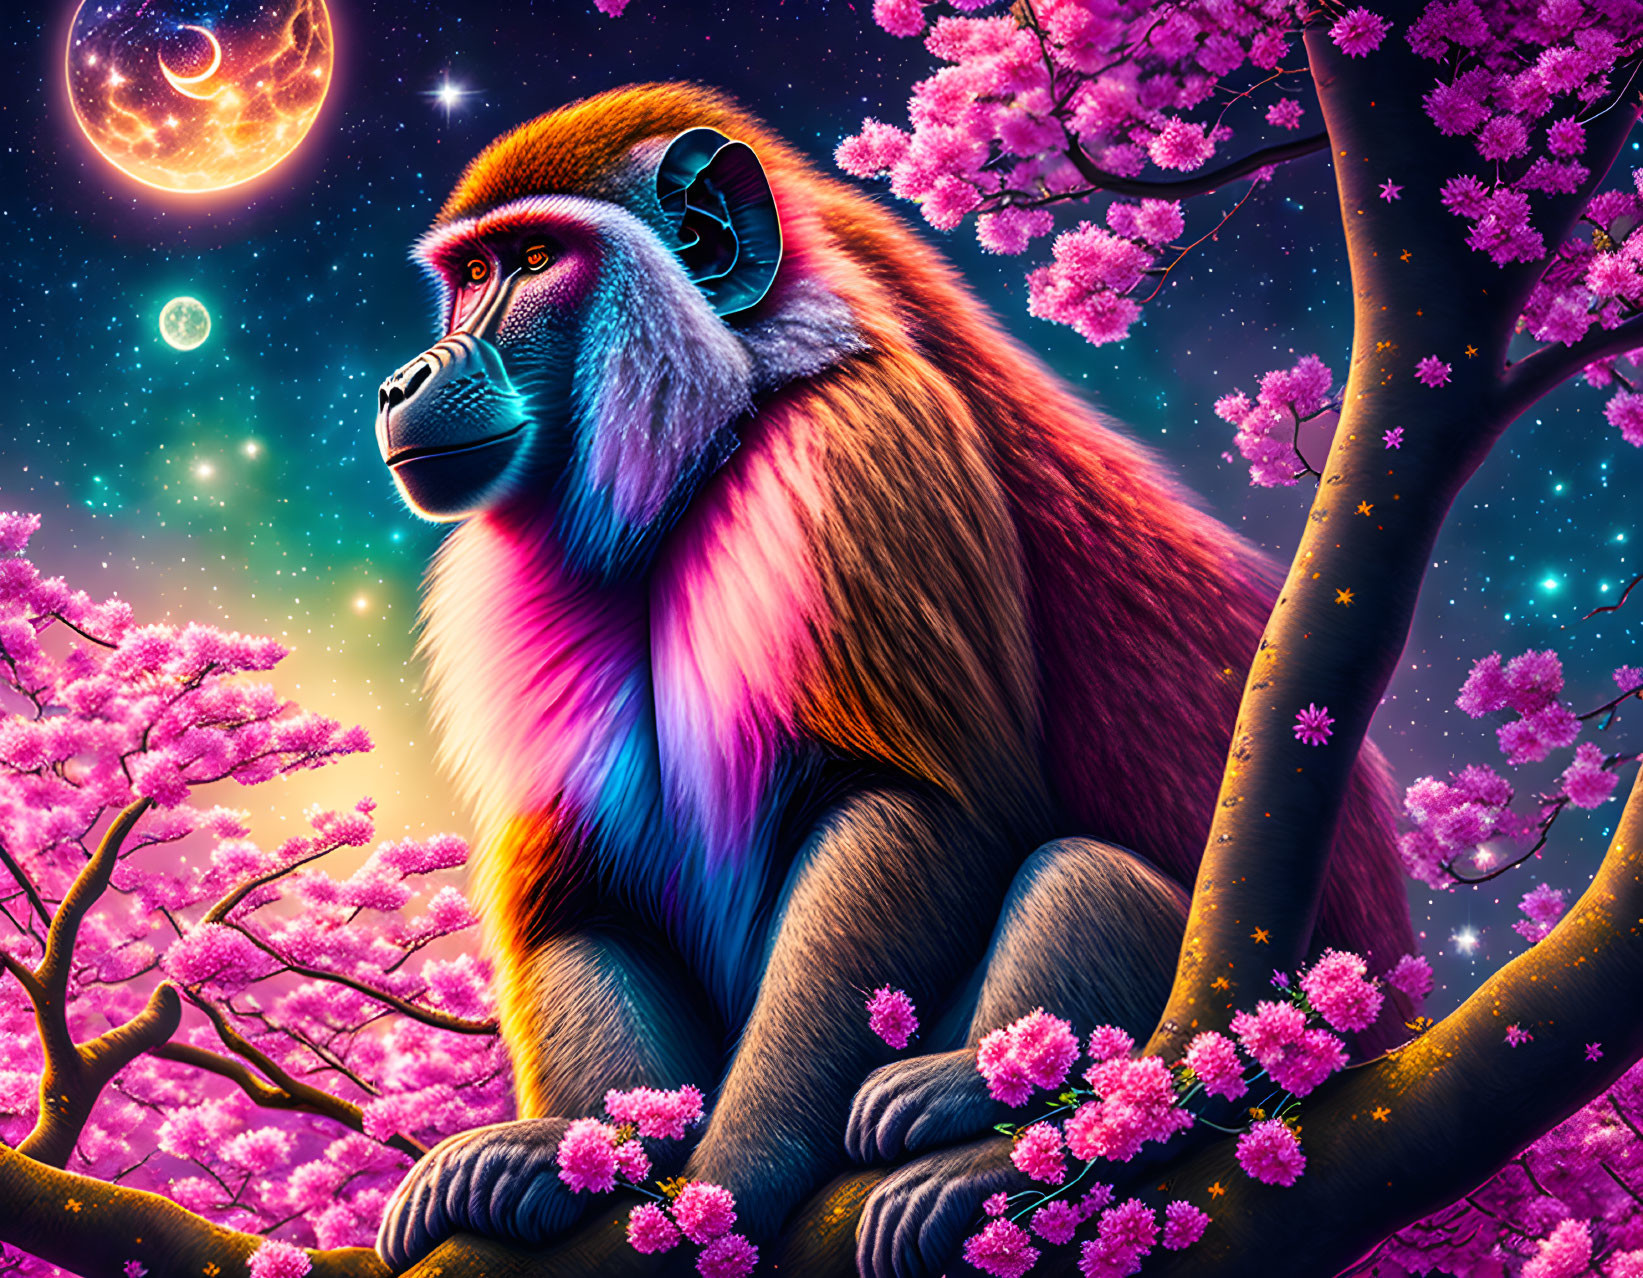 Colorful Mandrill Among Cherry Blossoms Under Starry Sky with Crescent and Full Moons